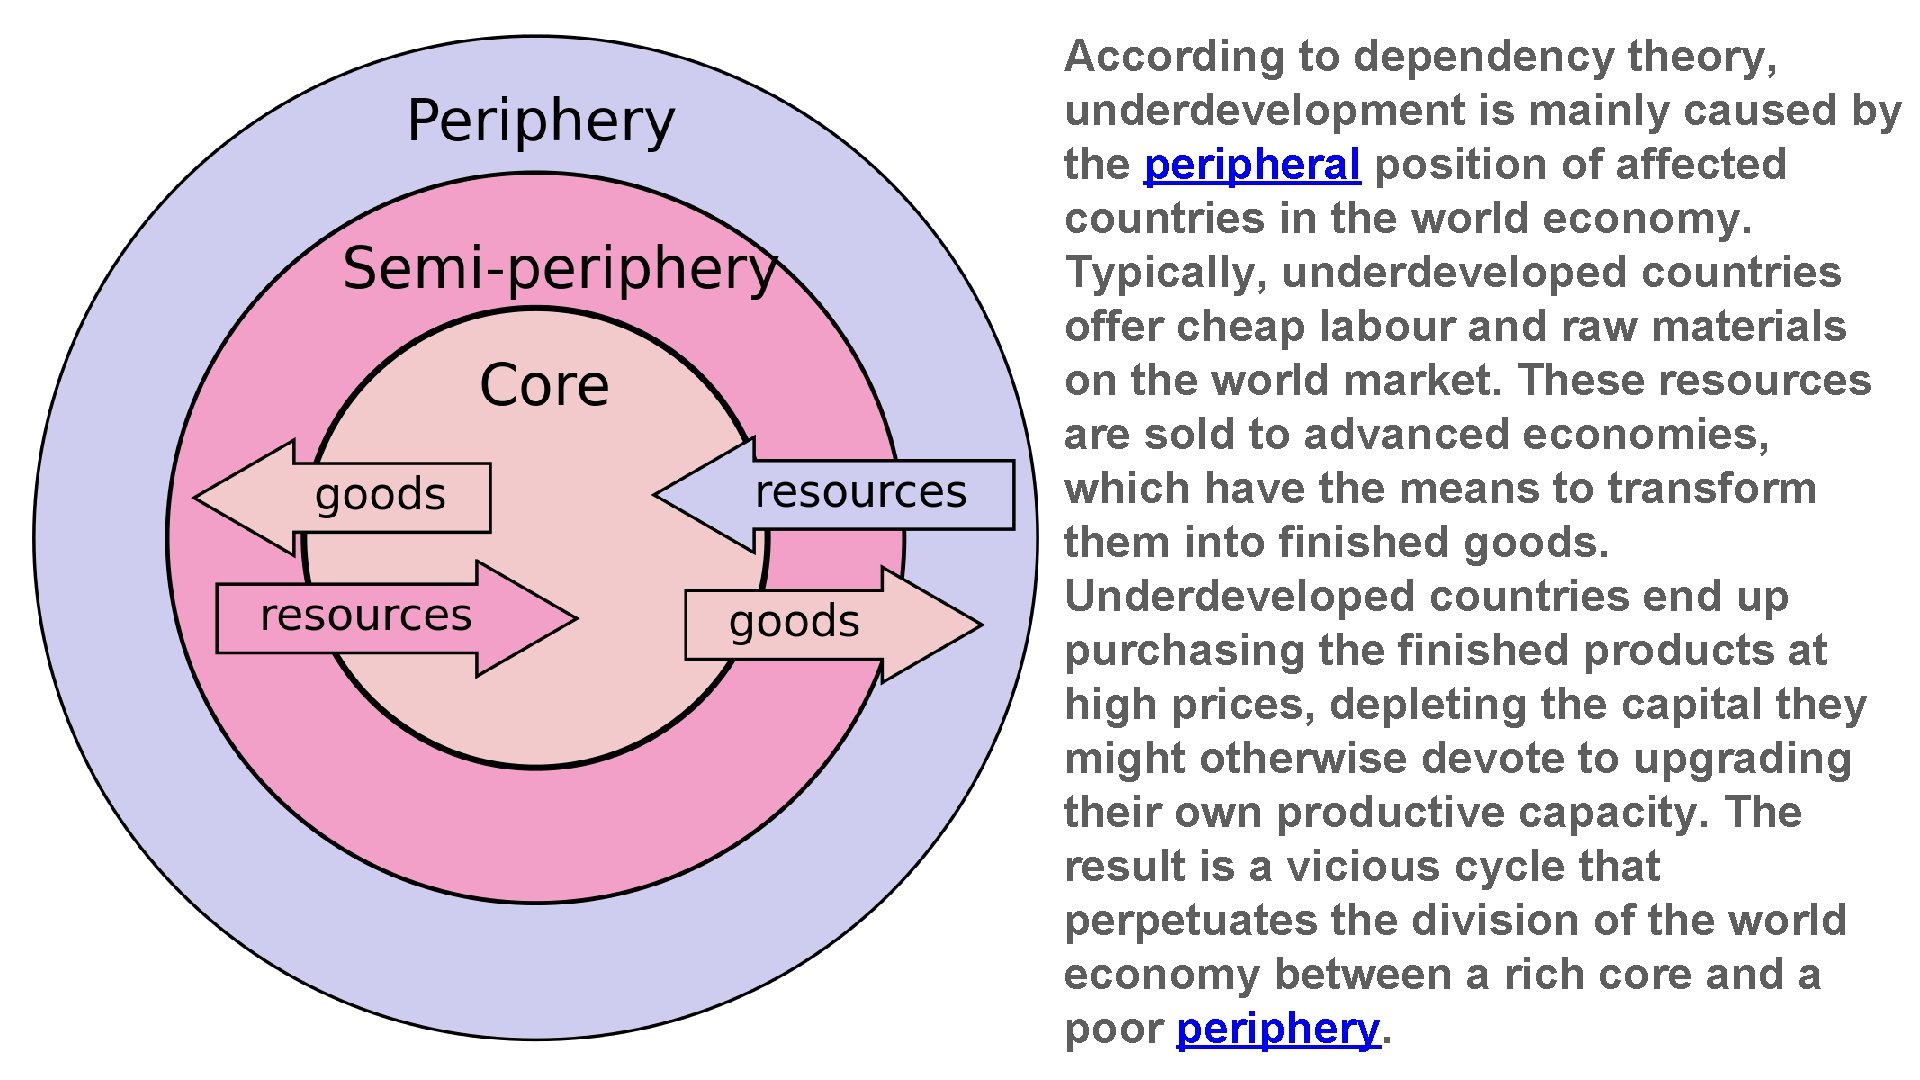 According to dependency theory, underdevelopment is mainly caused by the peripheral position of affected